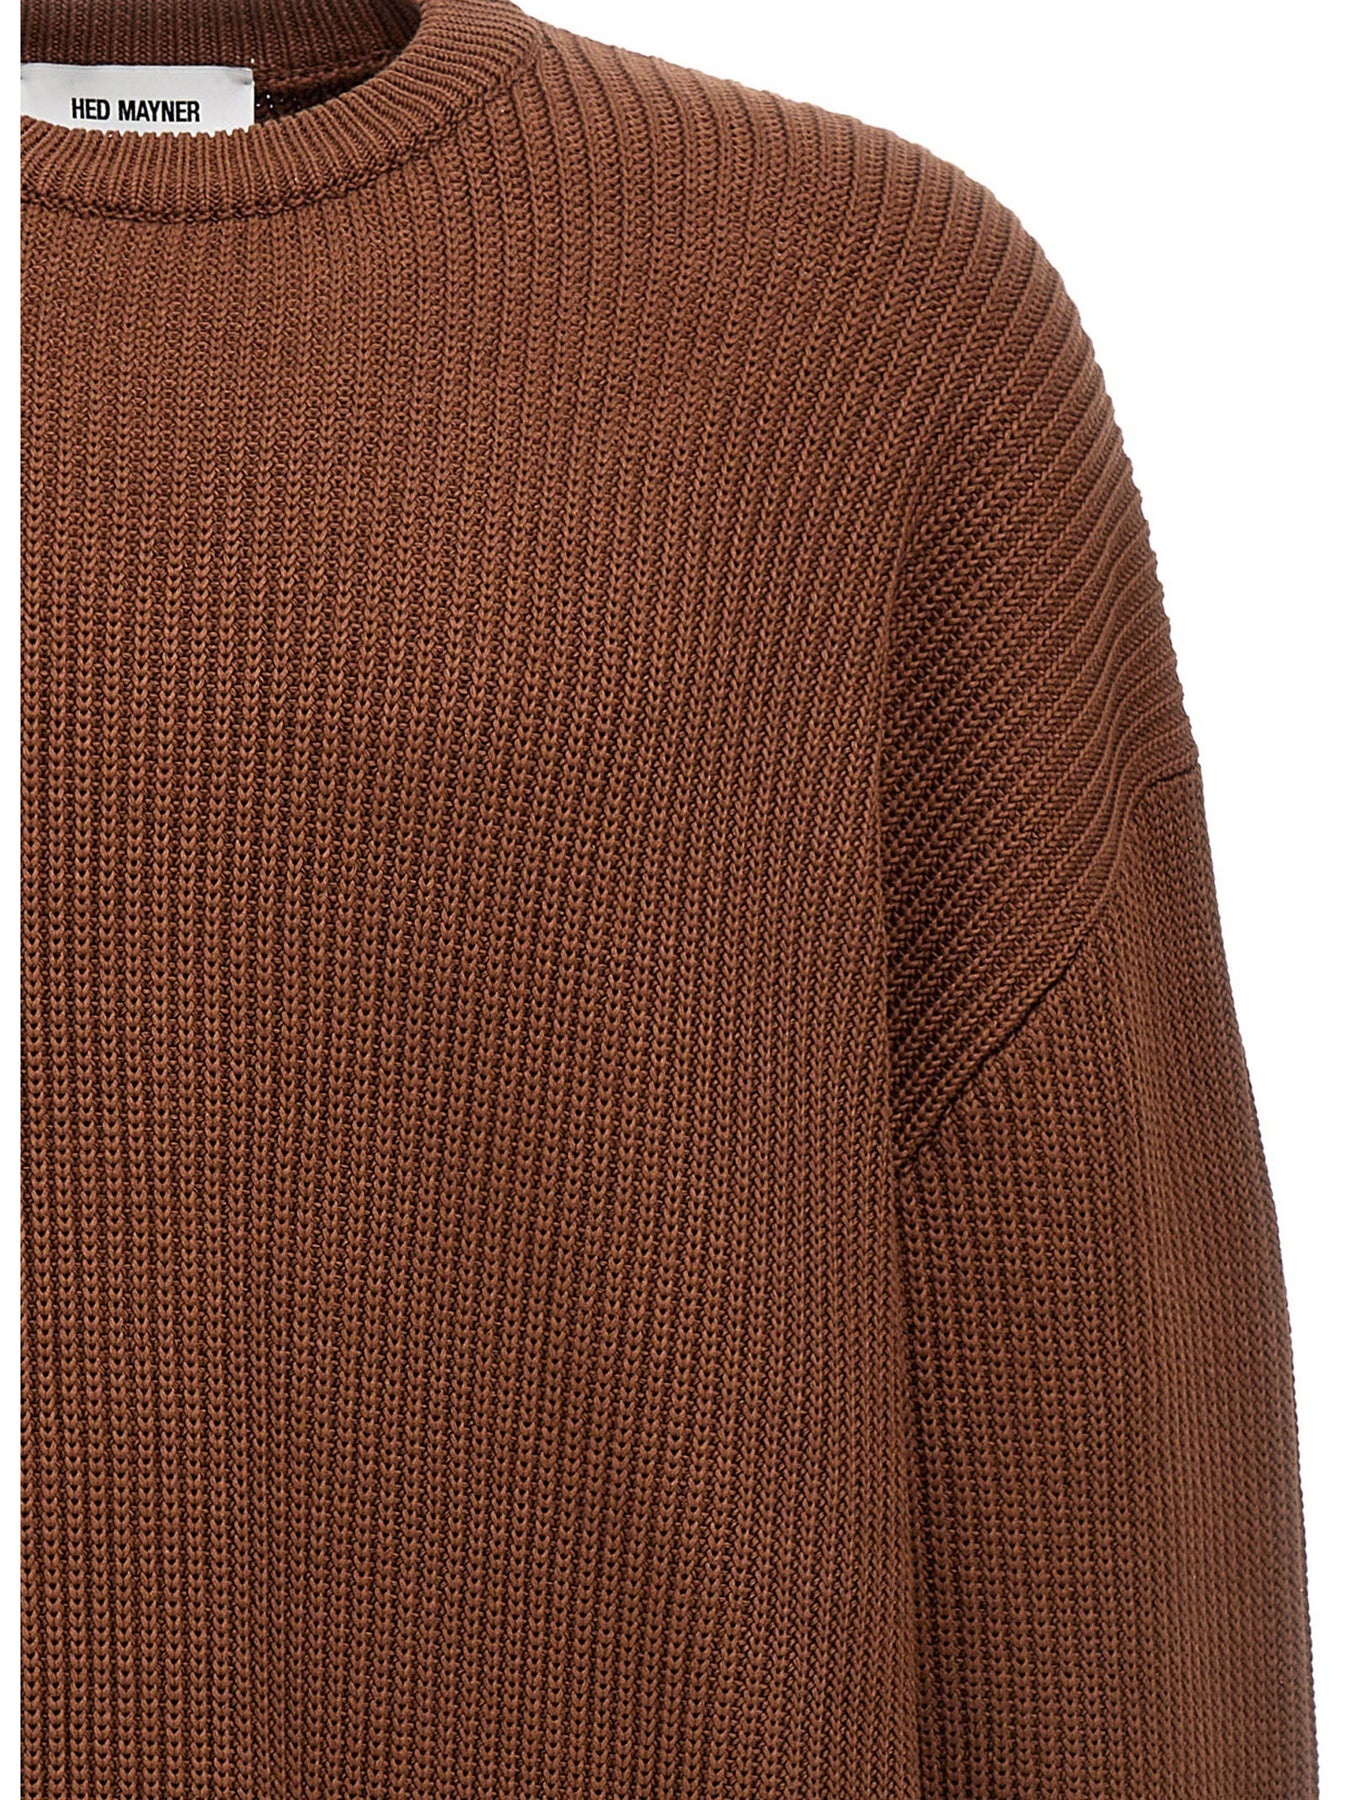 Twisted Sweater, Cardigans Brown - 3